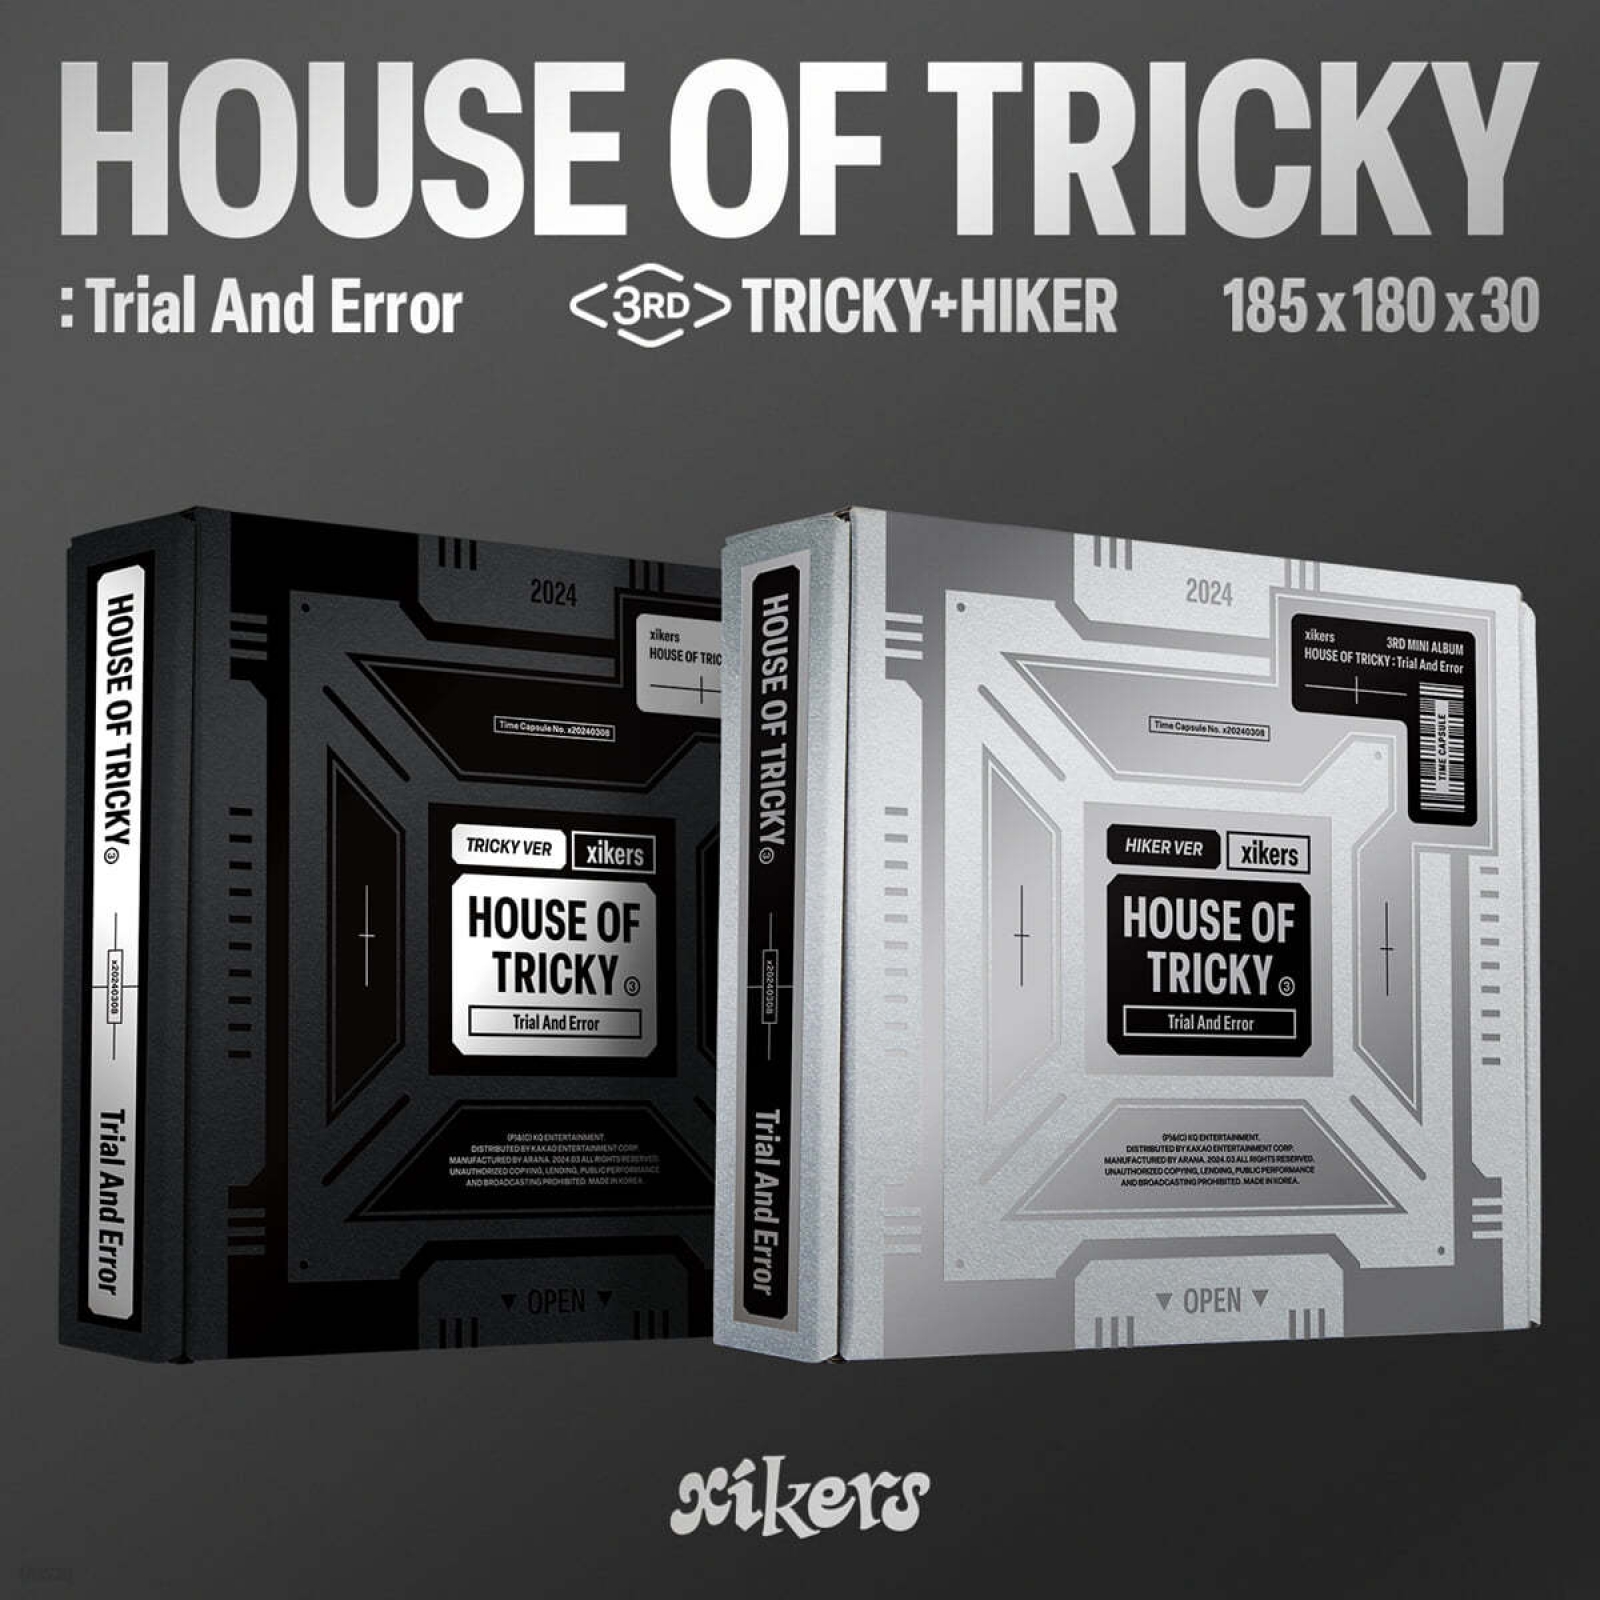 xikers - HOUSE OF TRICKY : Trial And Error / 3집 미니앨범 (2종 세트)